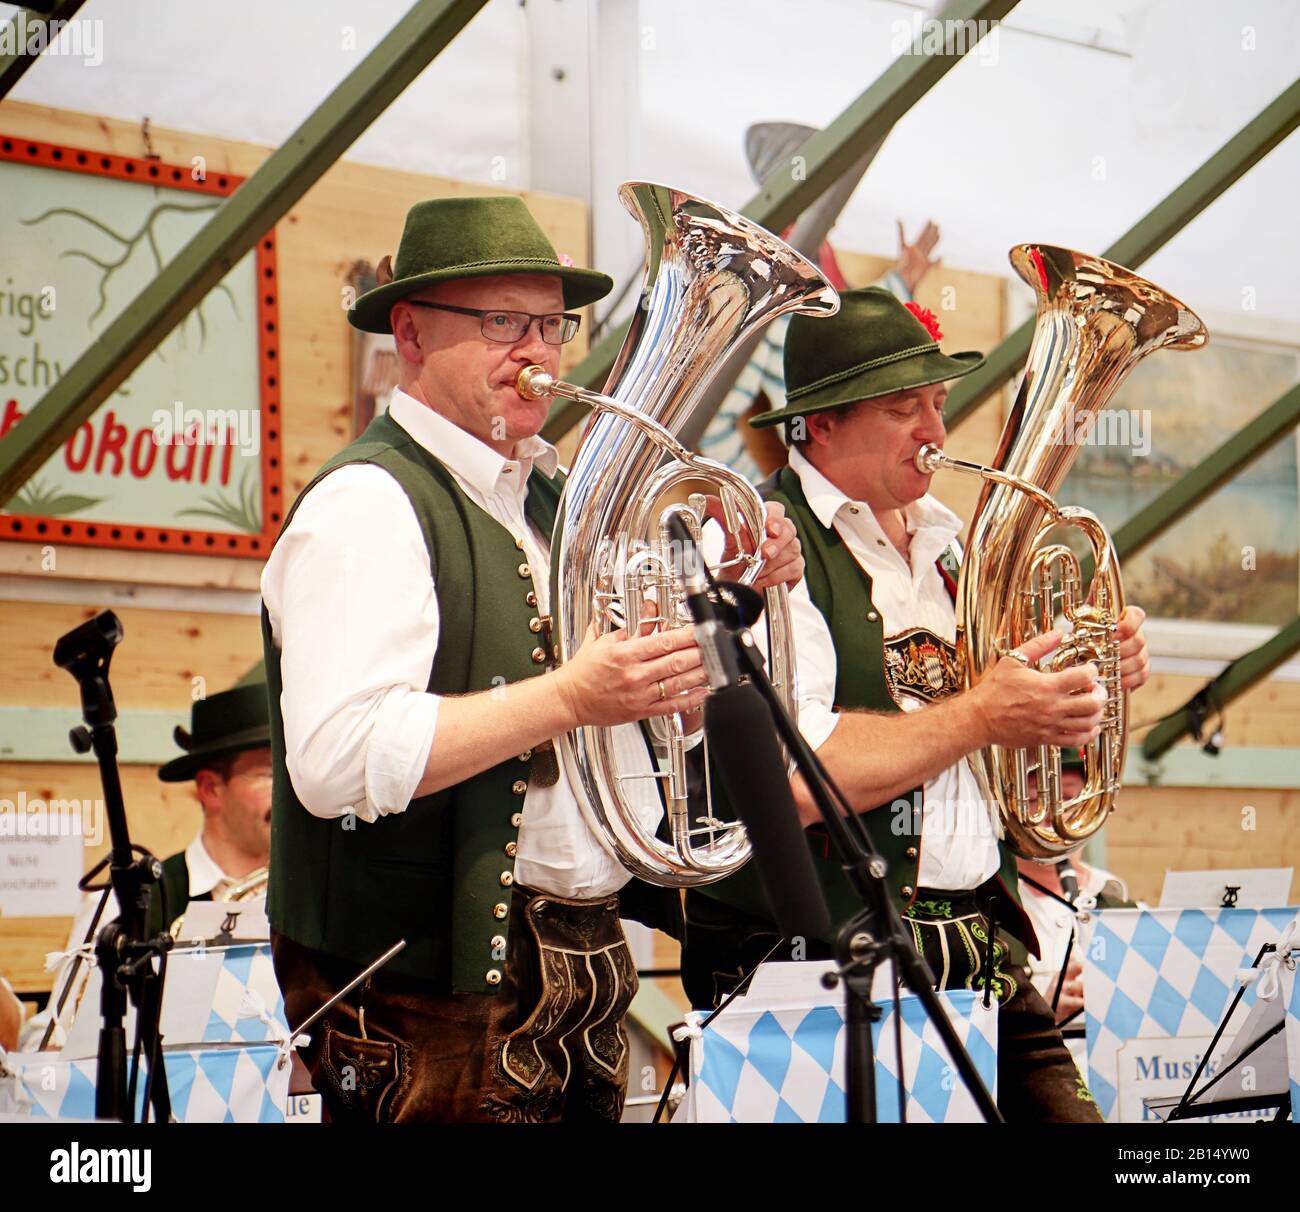 MUNICH, GERMANY - OCTOBER 1, 2019 Brass band playing traditional music in Bavarian costume in a beer tent of Oide Wiesn historical part of the Oktober Stock Photo